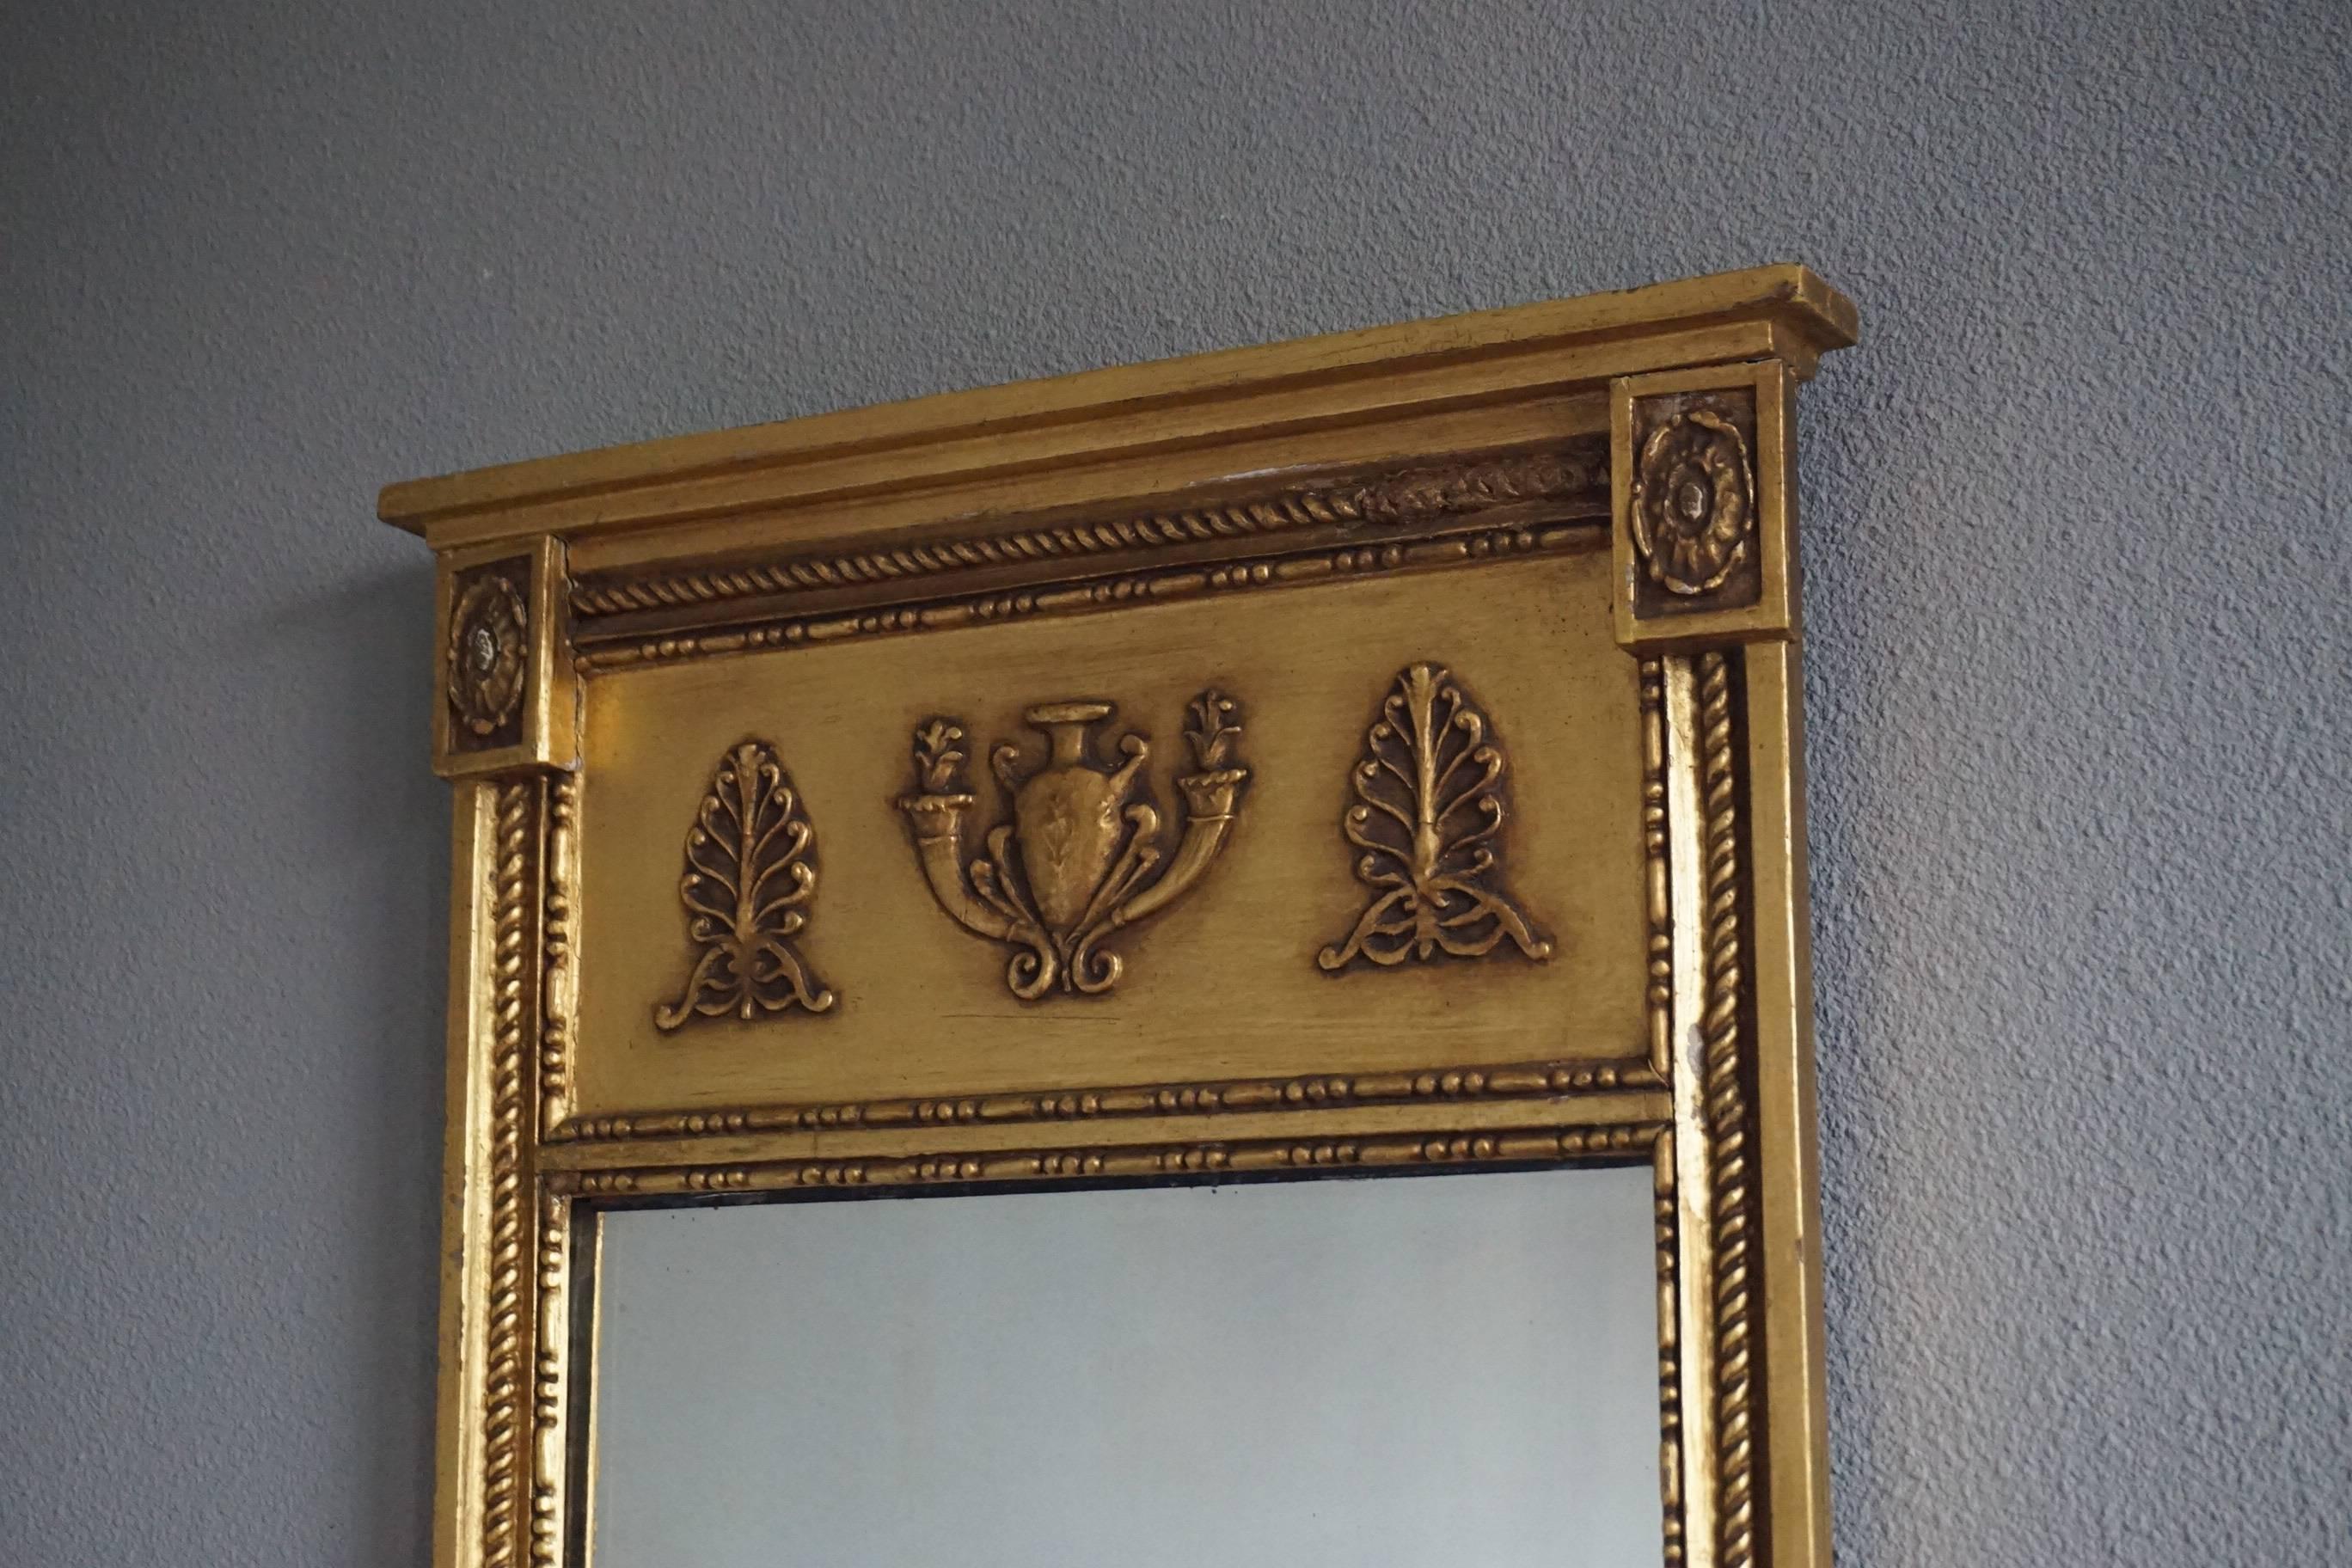 European Mid-19th Century Antique and Gilt Empire/Napoleonic Style Mirror For Sale